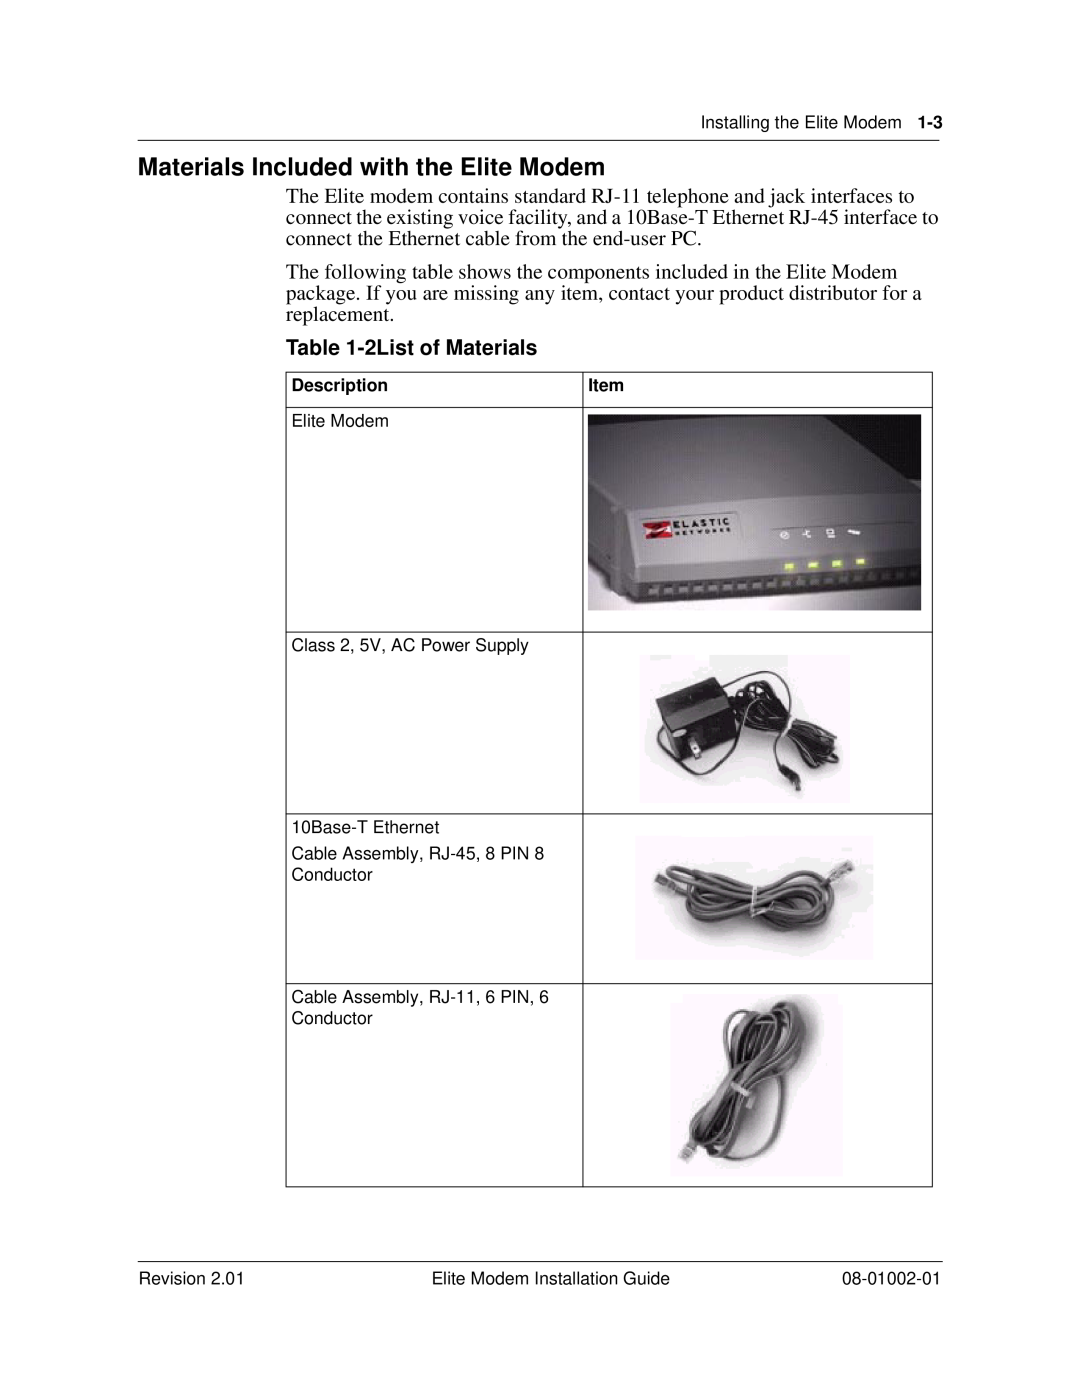 Zhone Technologies 08-01002-01 manual Materials Included with the Elite Modem, 2List of Materials 